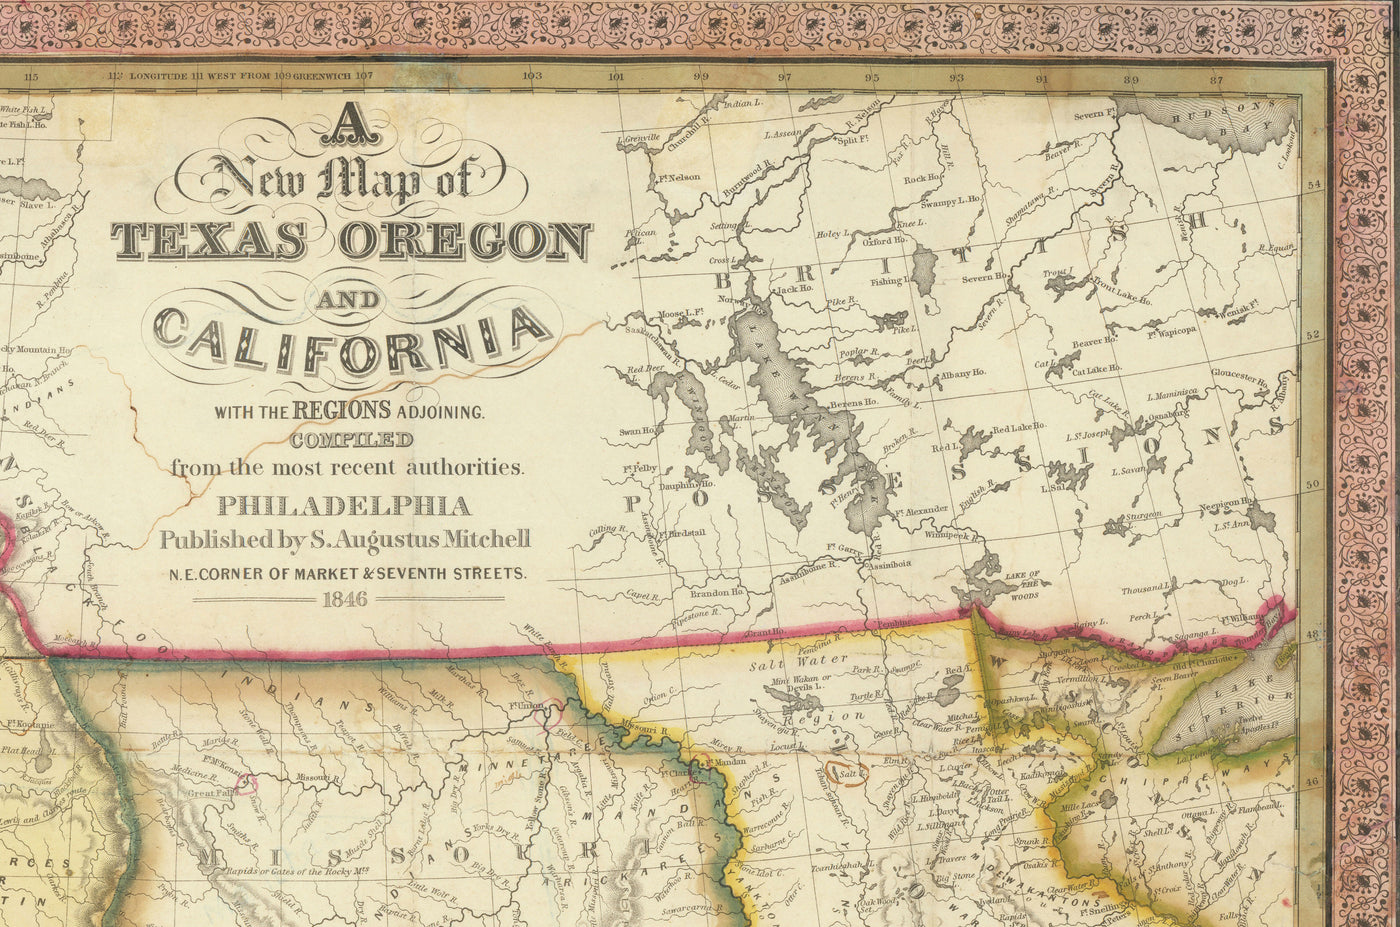 Old Map of the Western USA, 1846 by Samuel Mitchell - Big California & Oregon - Indian, Missouri Territory - British Possessions